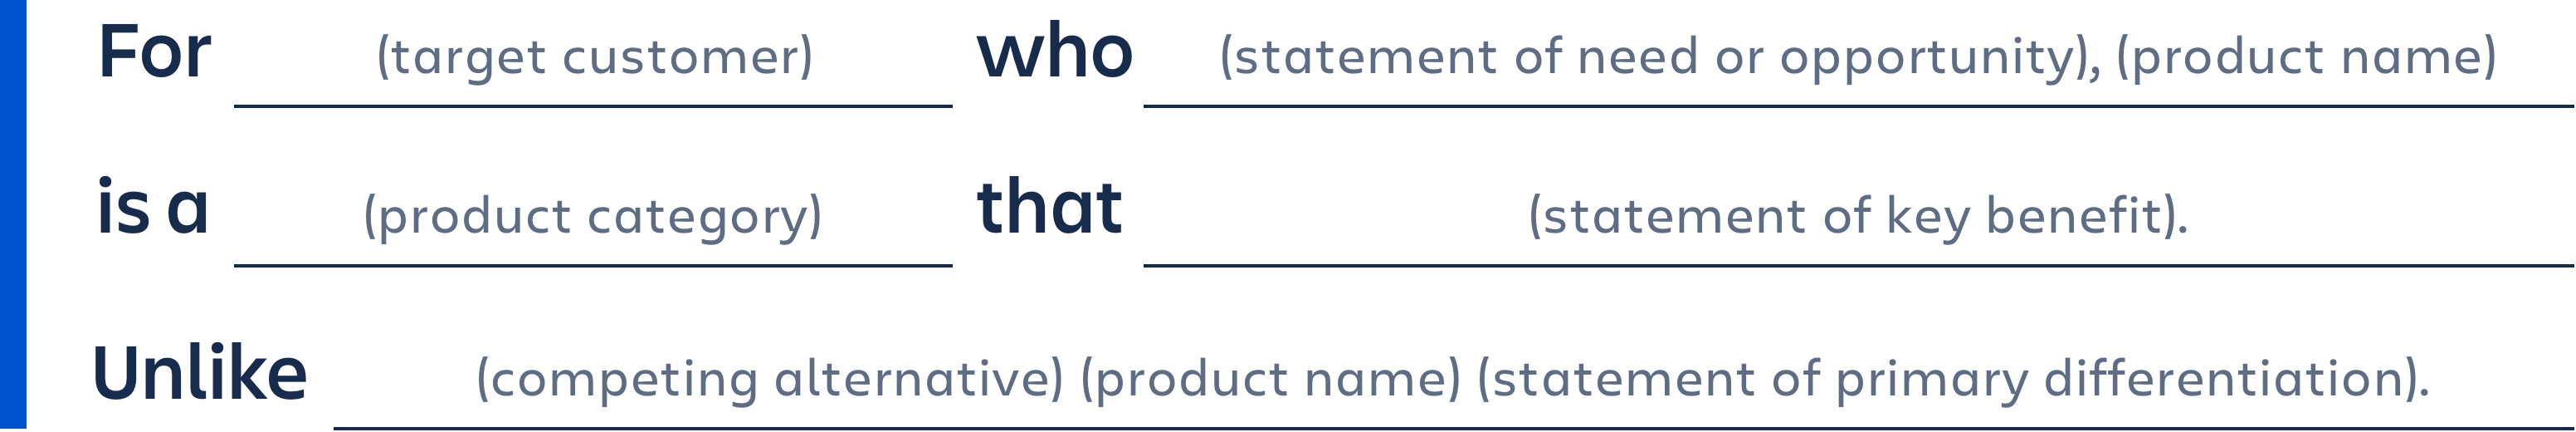 For (target customer) who (statement of nee or opportunity), (product name) is a (product category) that (statement of key benefit).